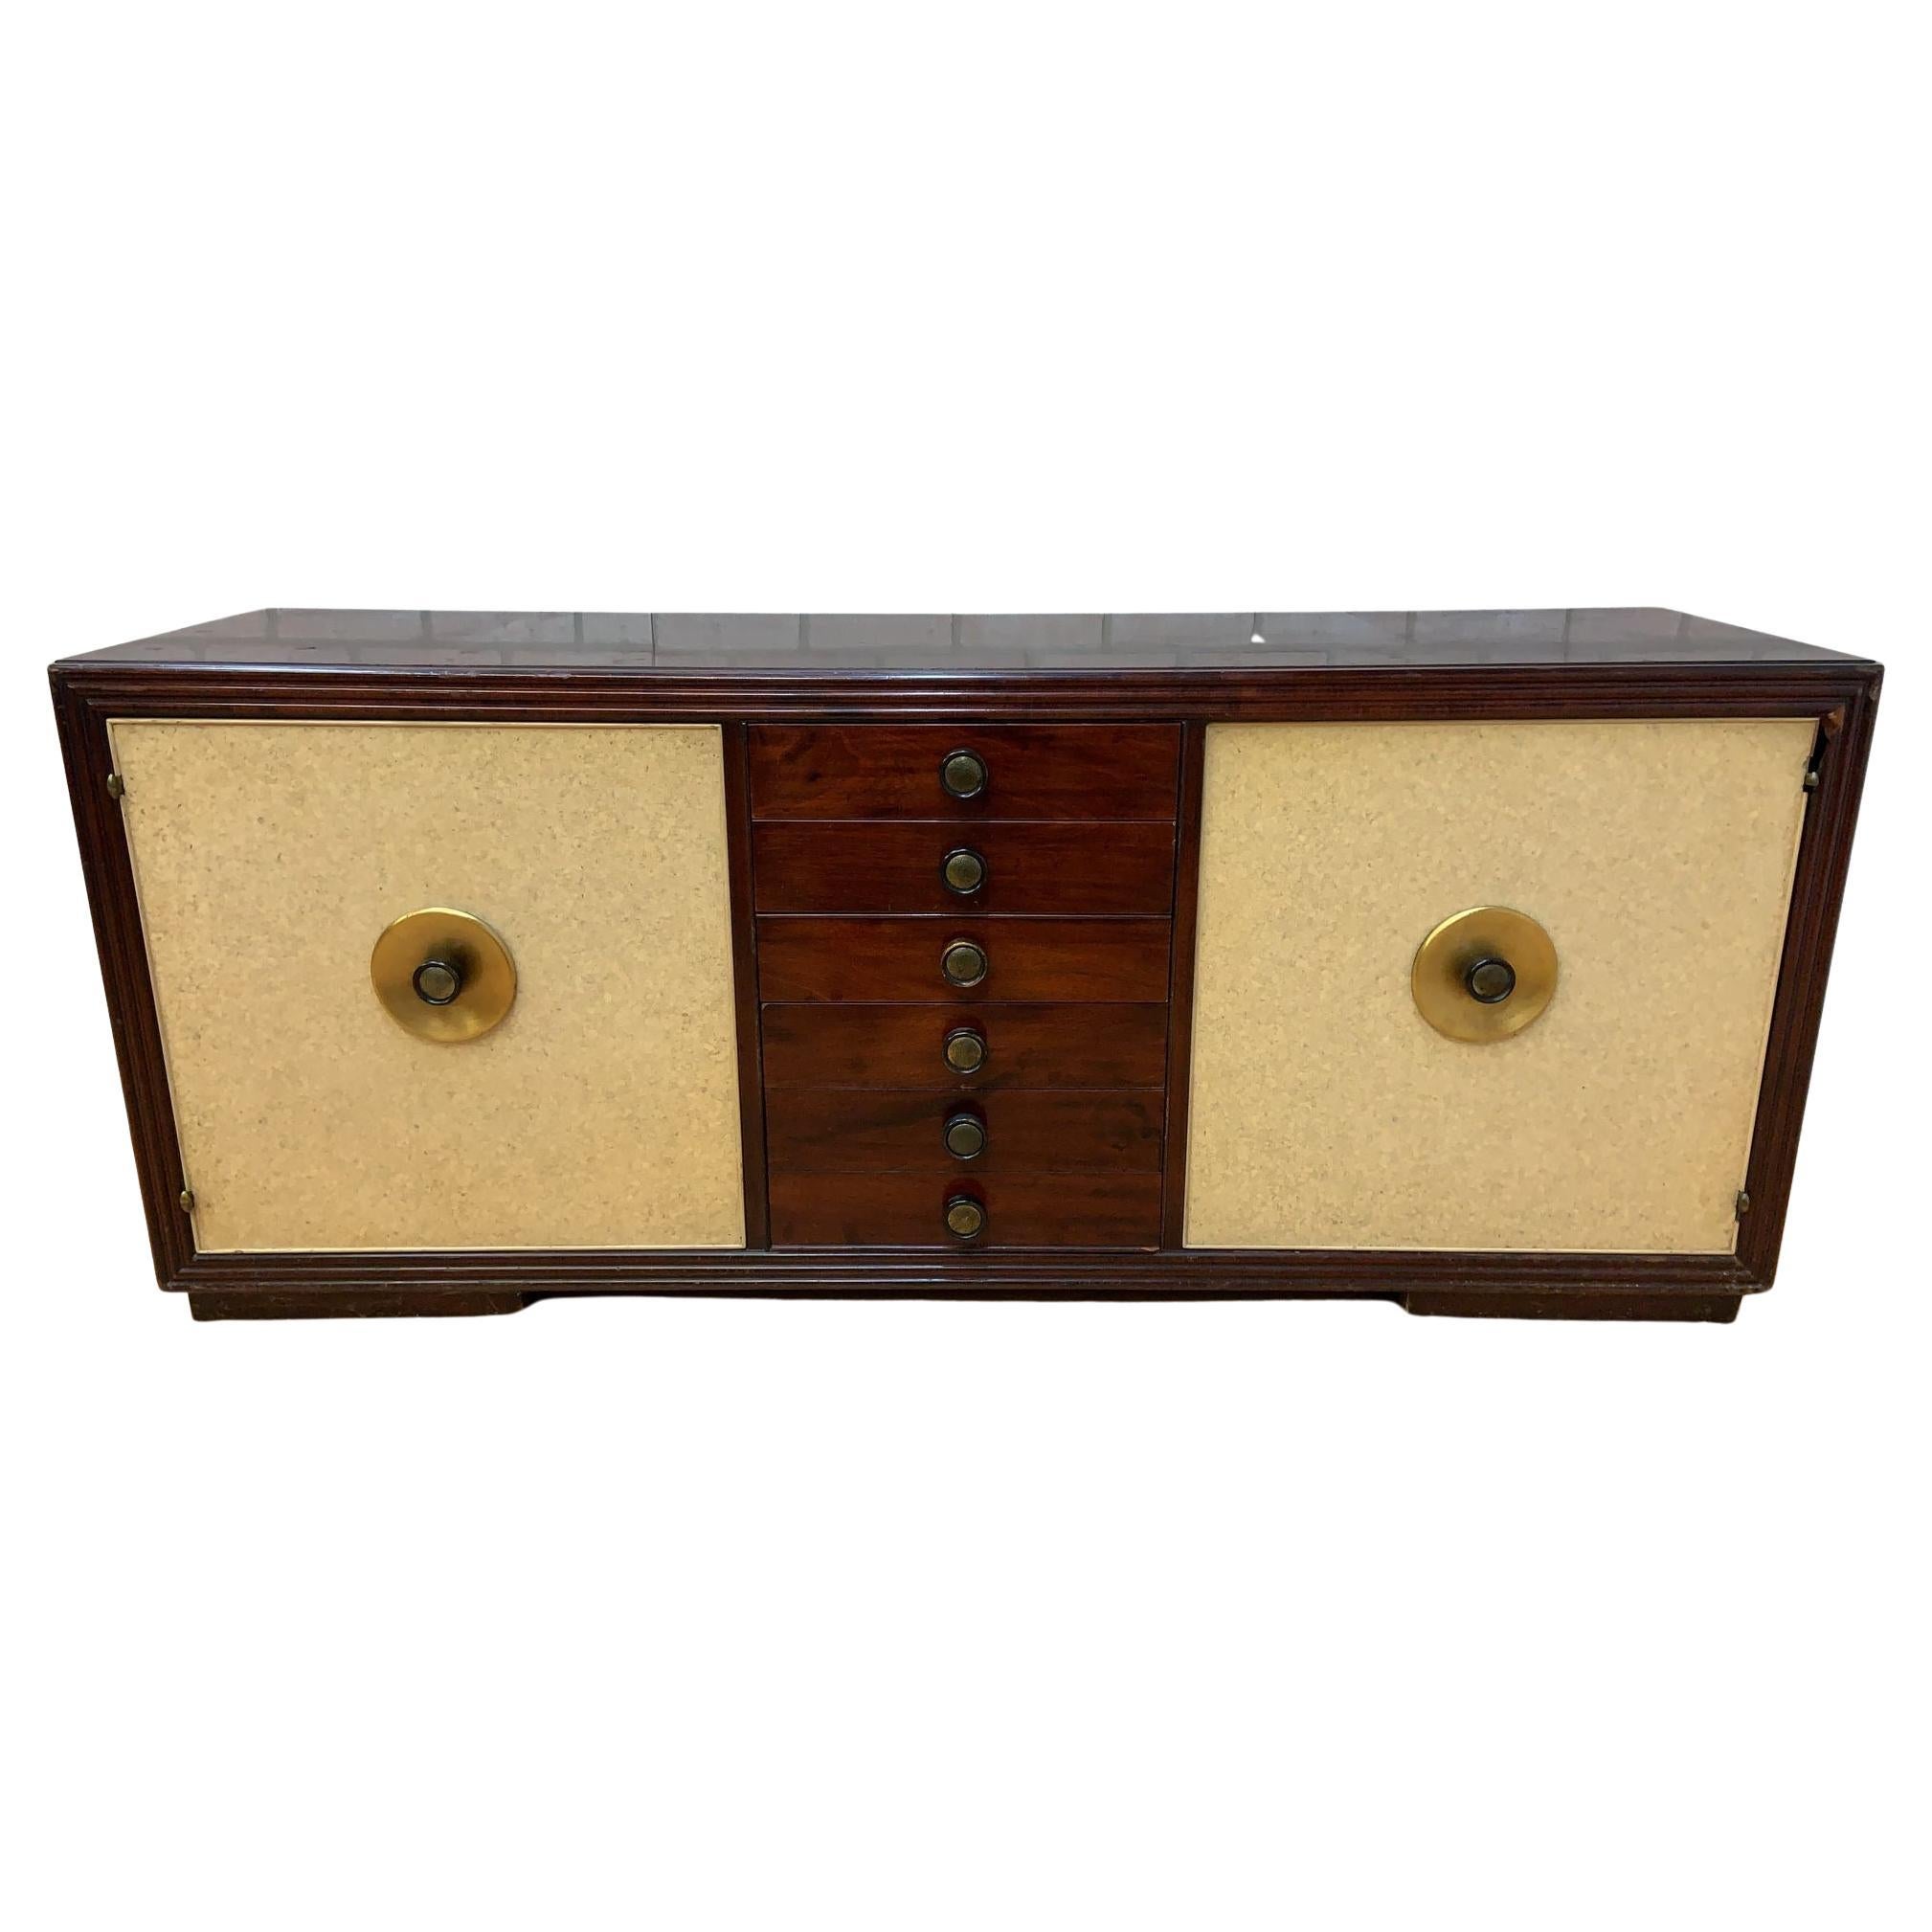 Art Deco Paul Frankl for Johnson Furniture Mahogany and Cork Sideboard